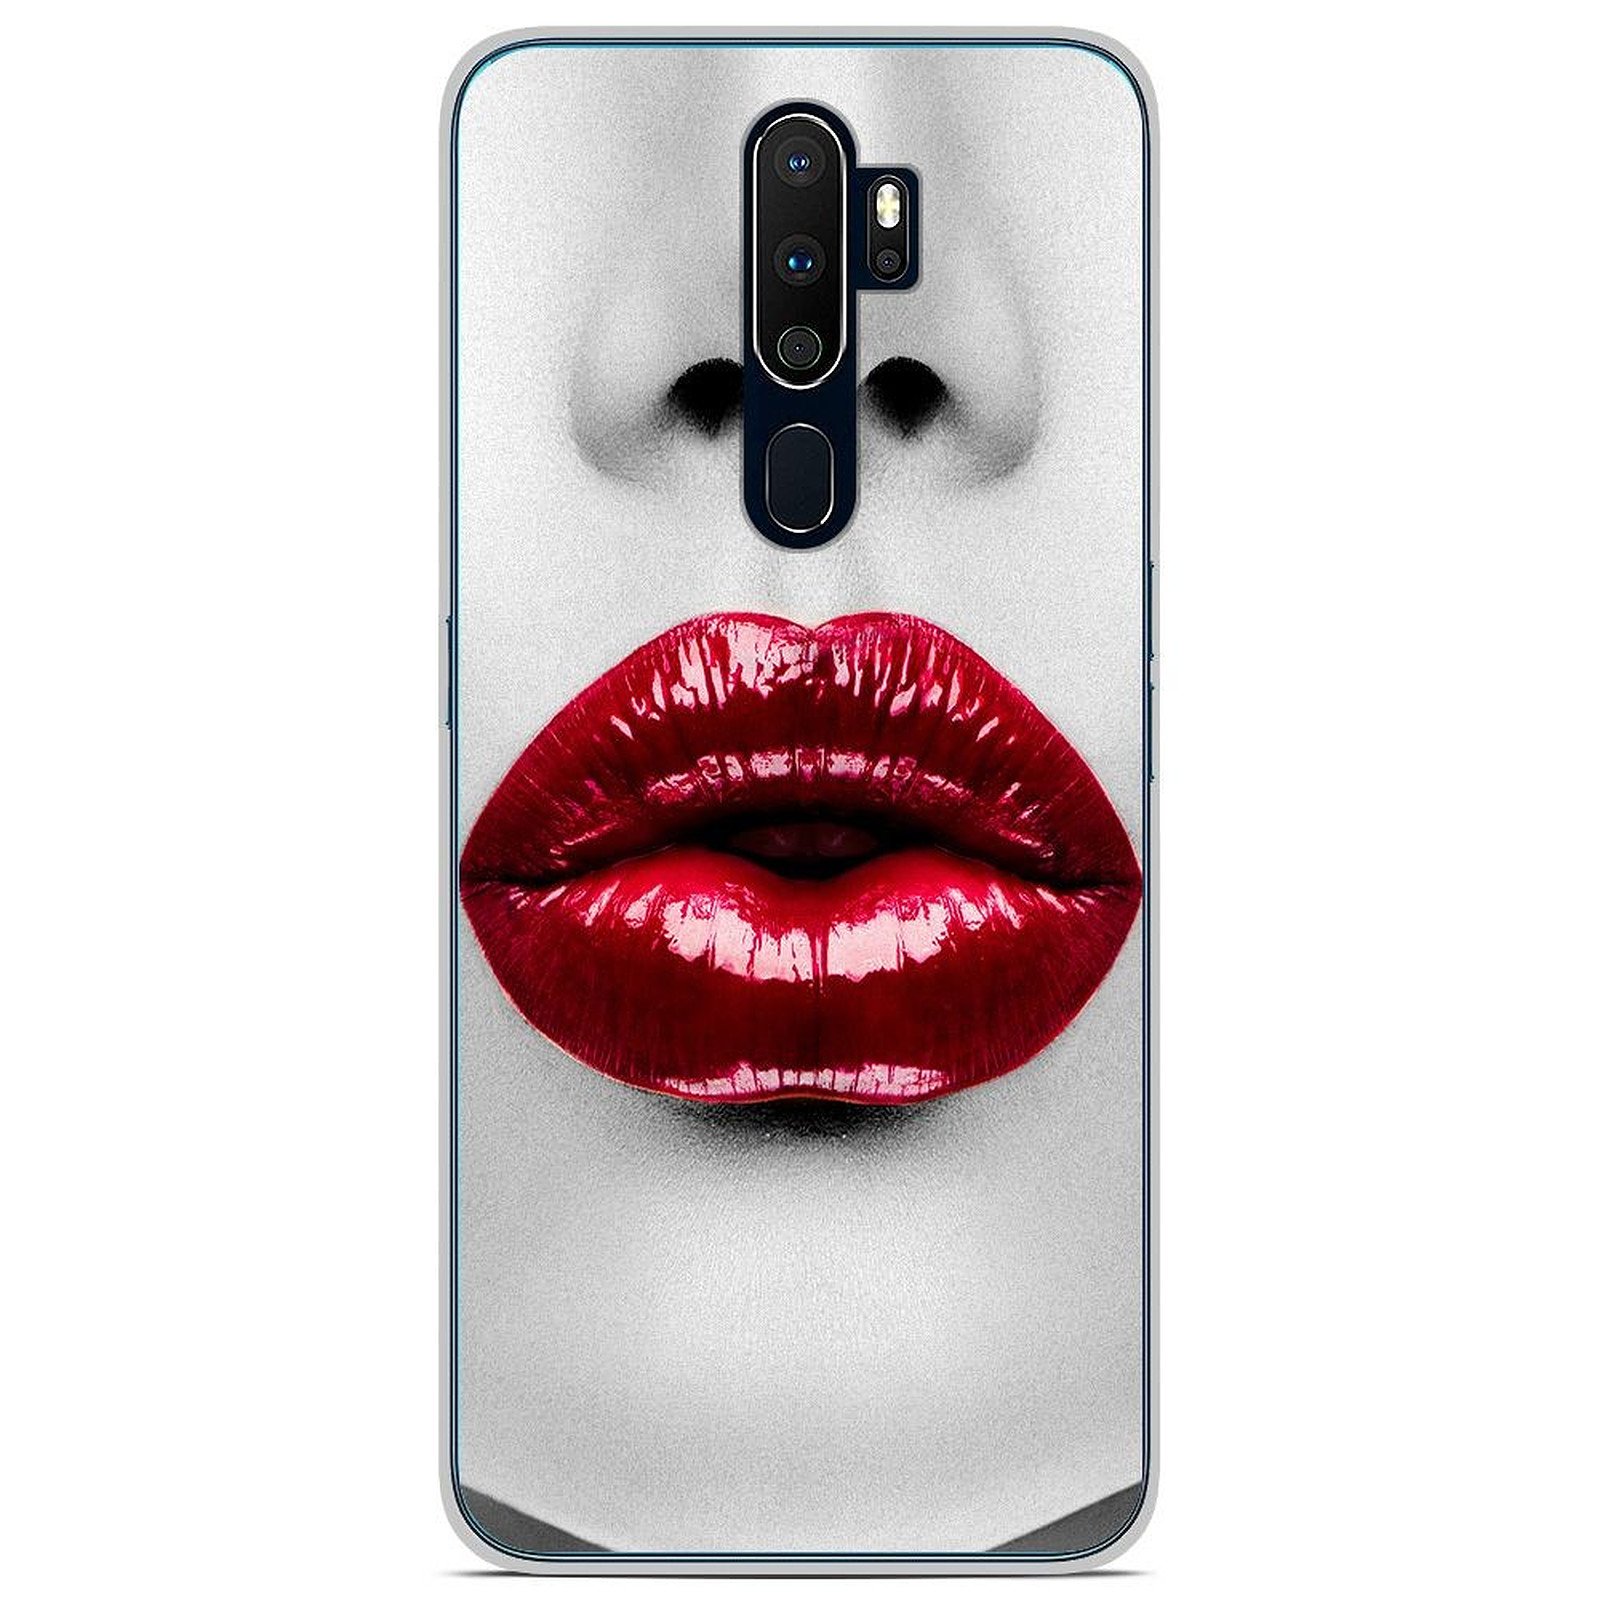 1001 Coques Coque silicone gel Oppo A9 2020 motif Lèvres Rouges - Coque telephone 1001Coques